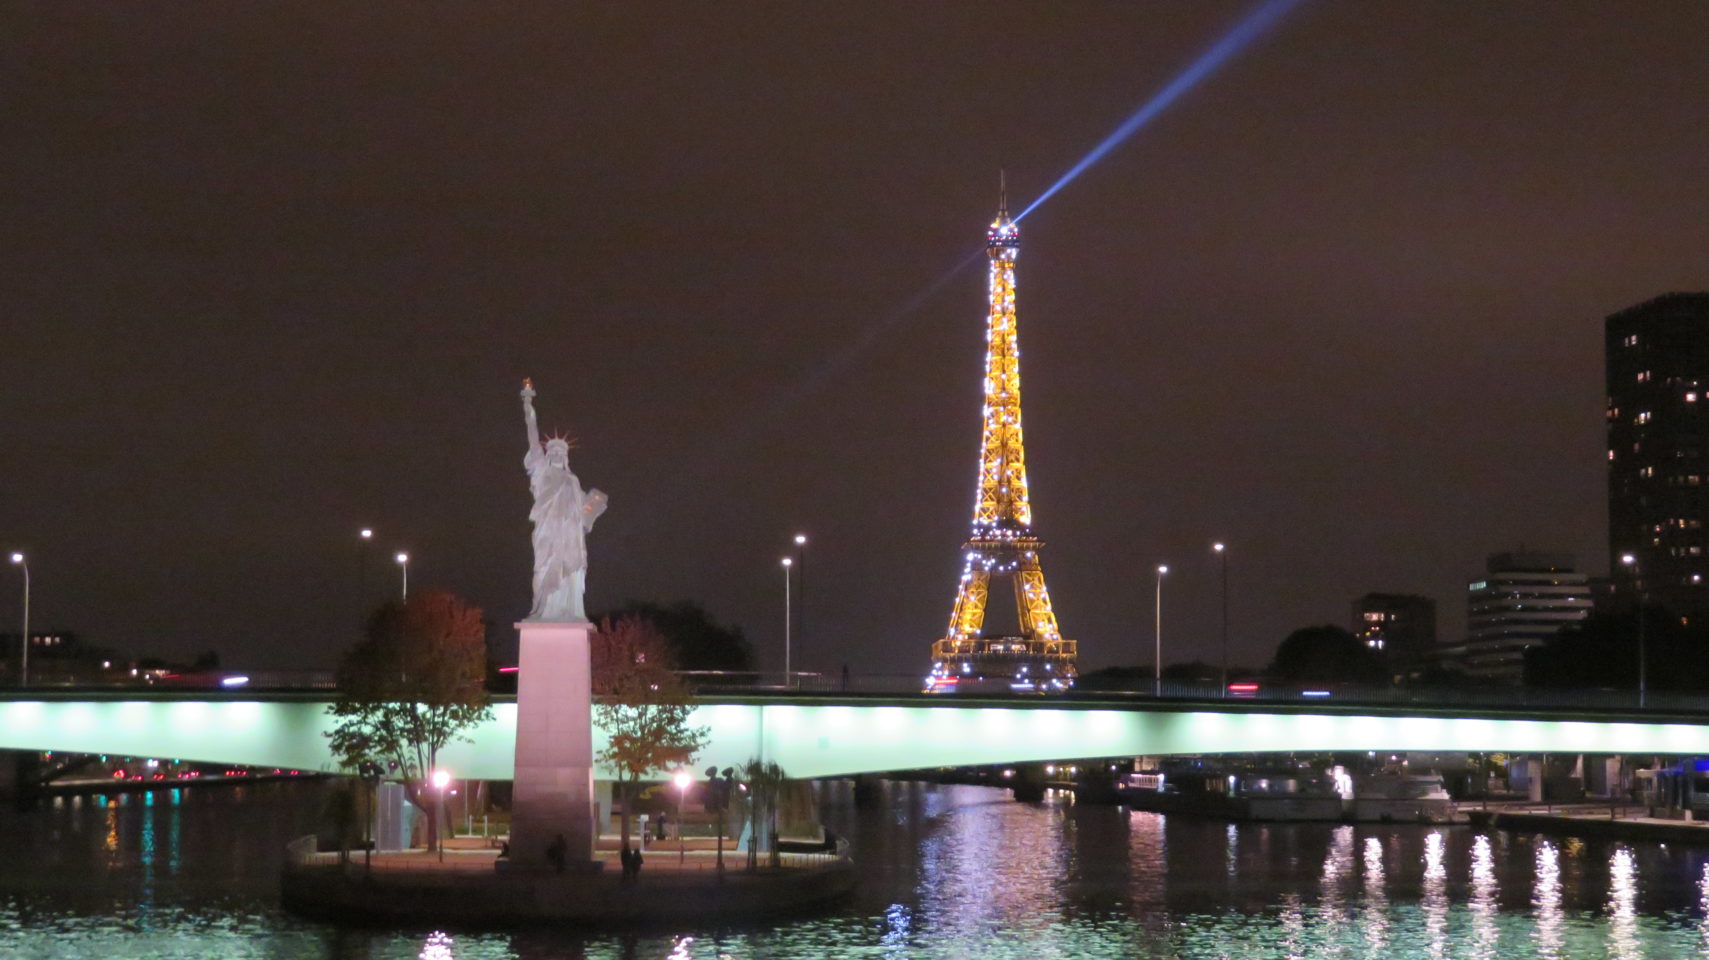 Statue of Liberty and Eiffel Tower at night in Paris, France (Paris and Normandie AMAWaterways Cruise)